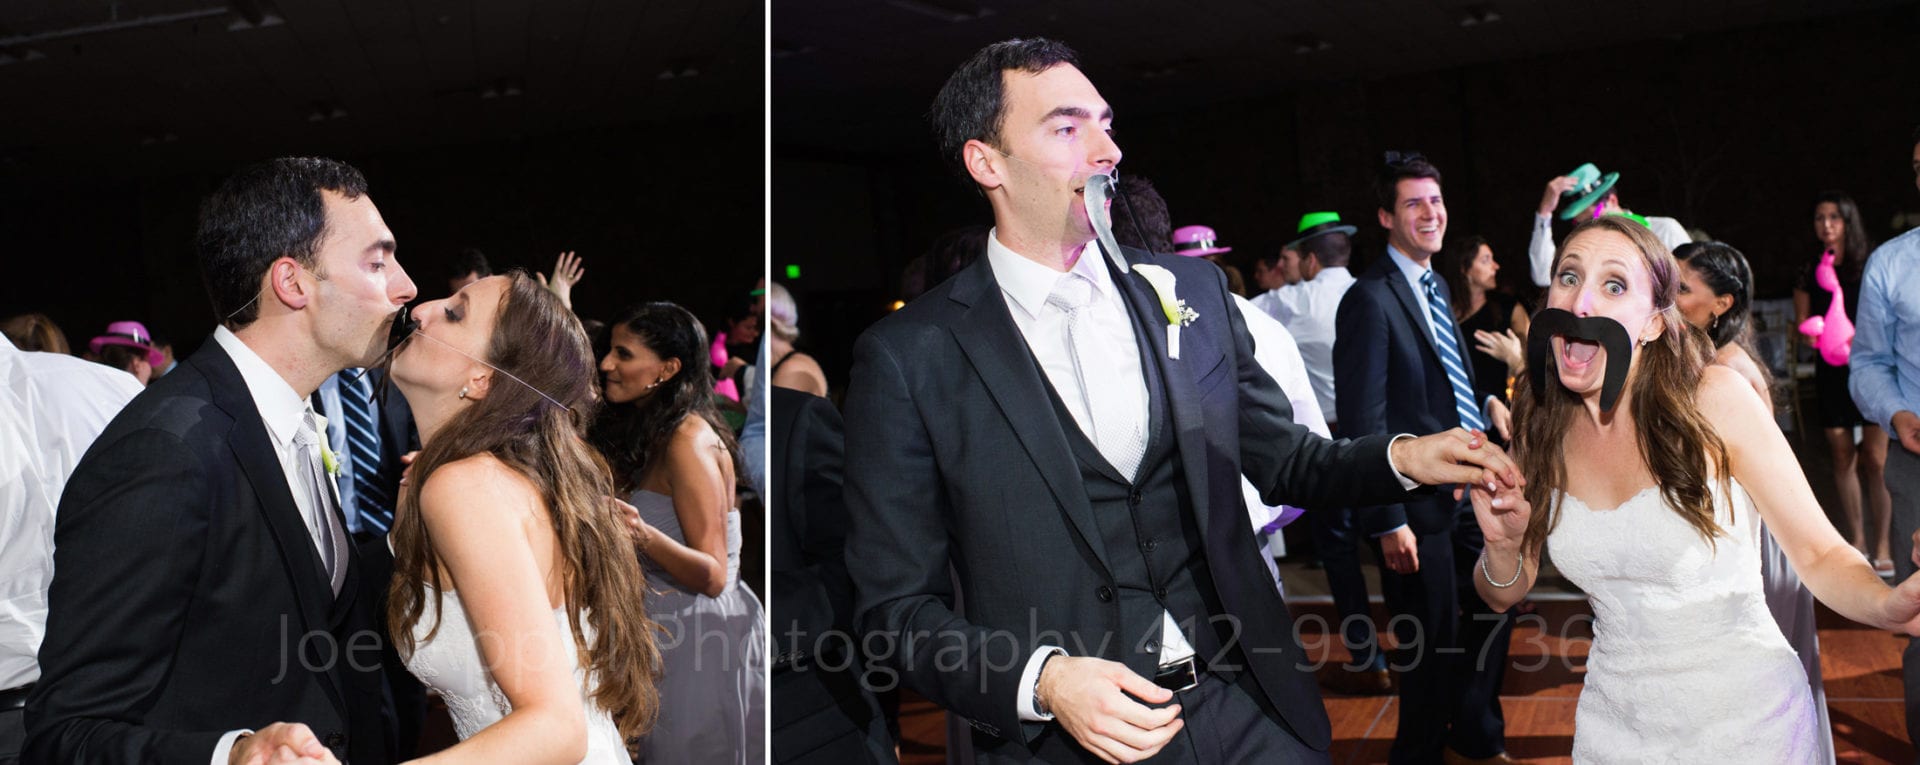 A bride and groom wearing giant fake mustaches kiss on a dance floor.